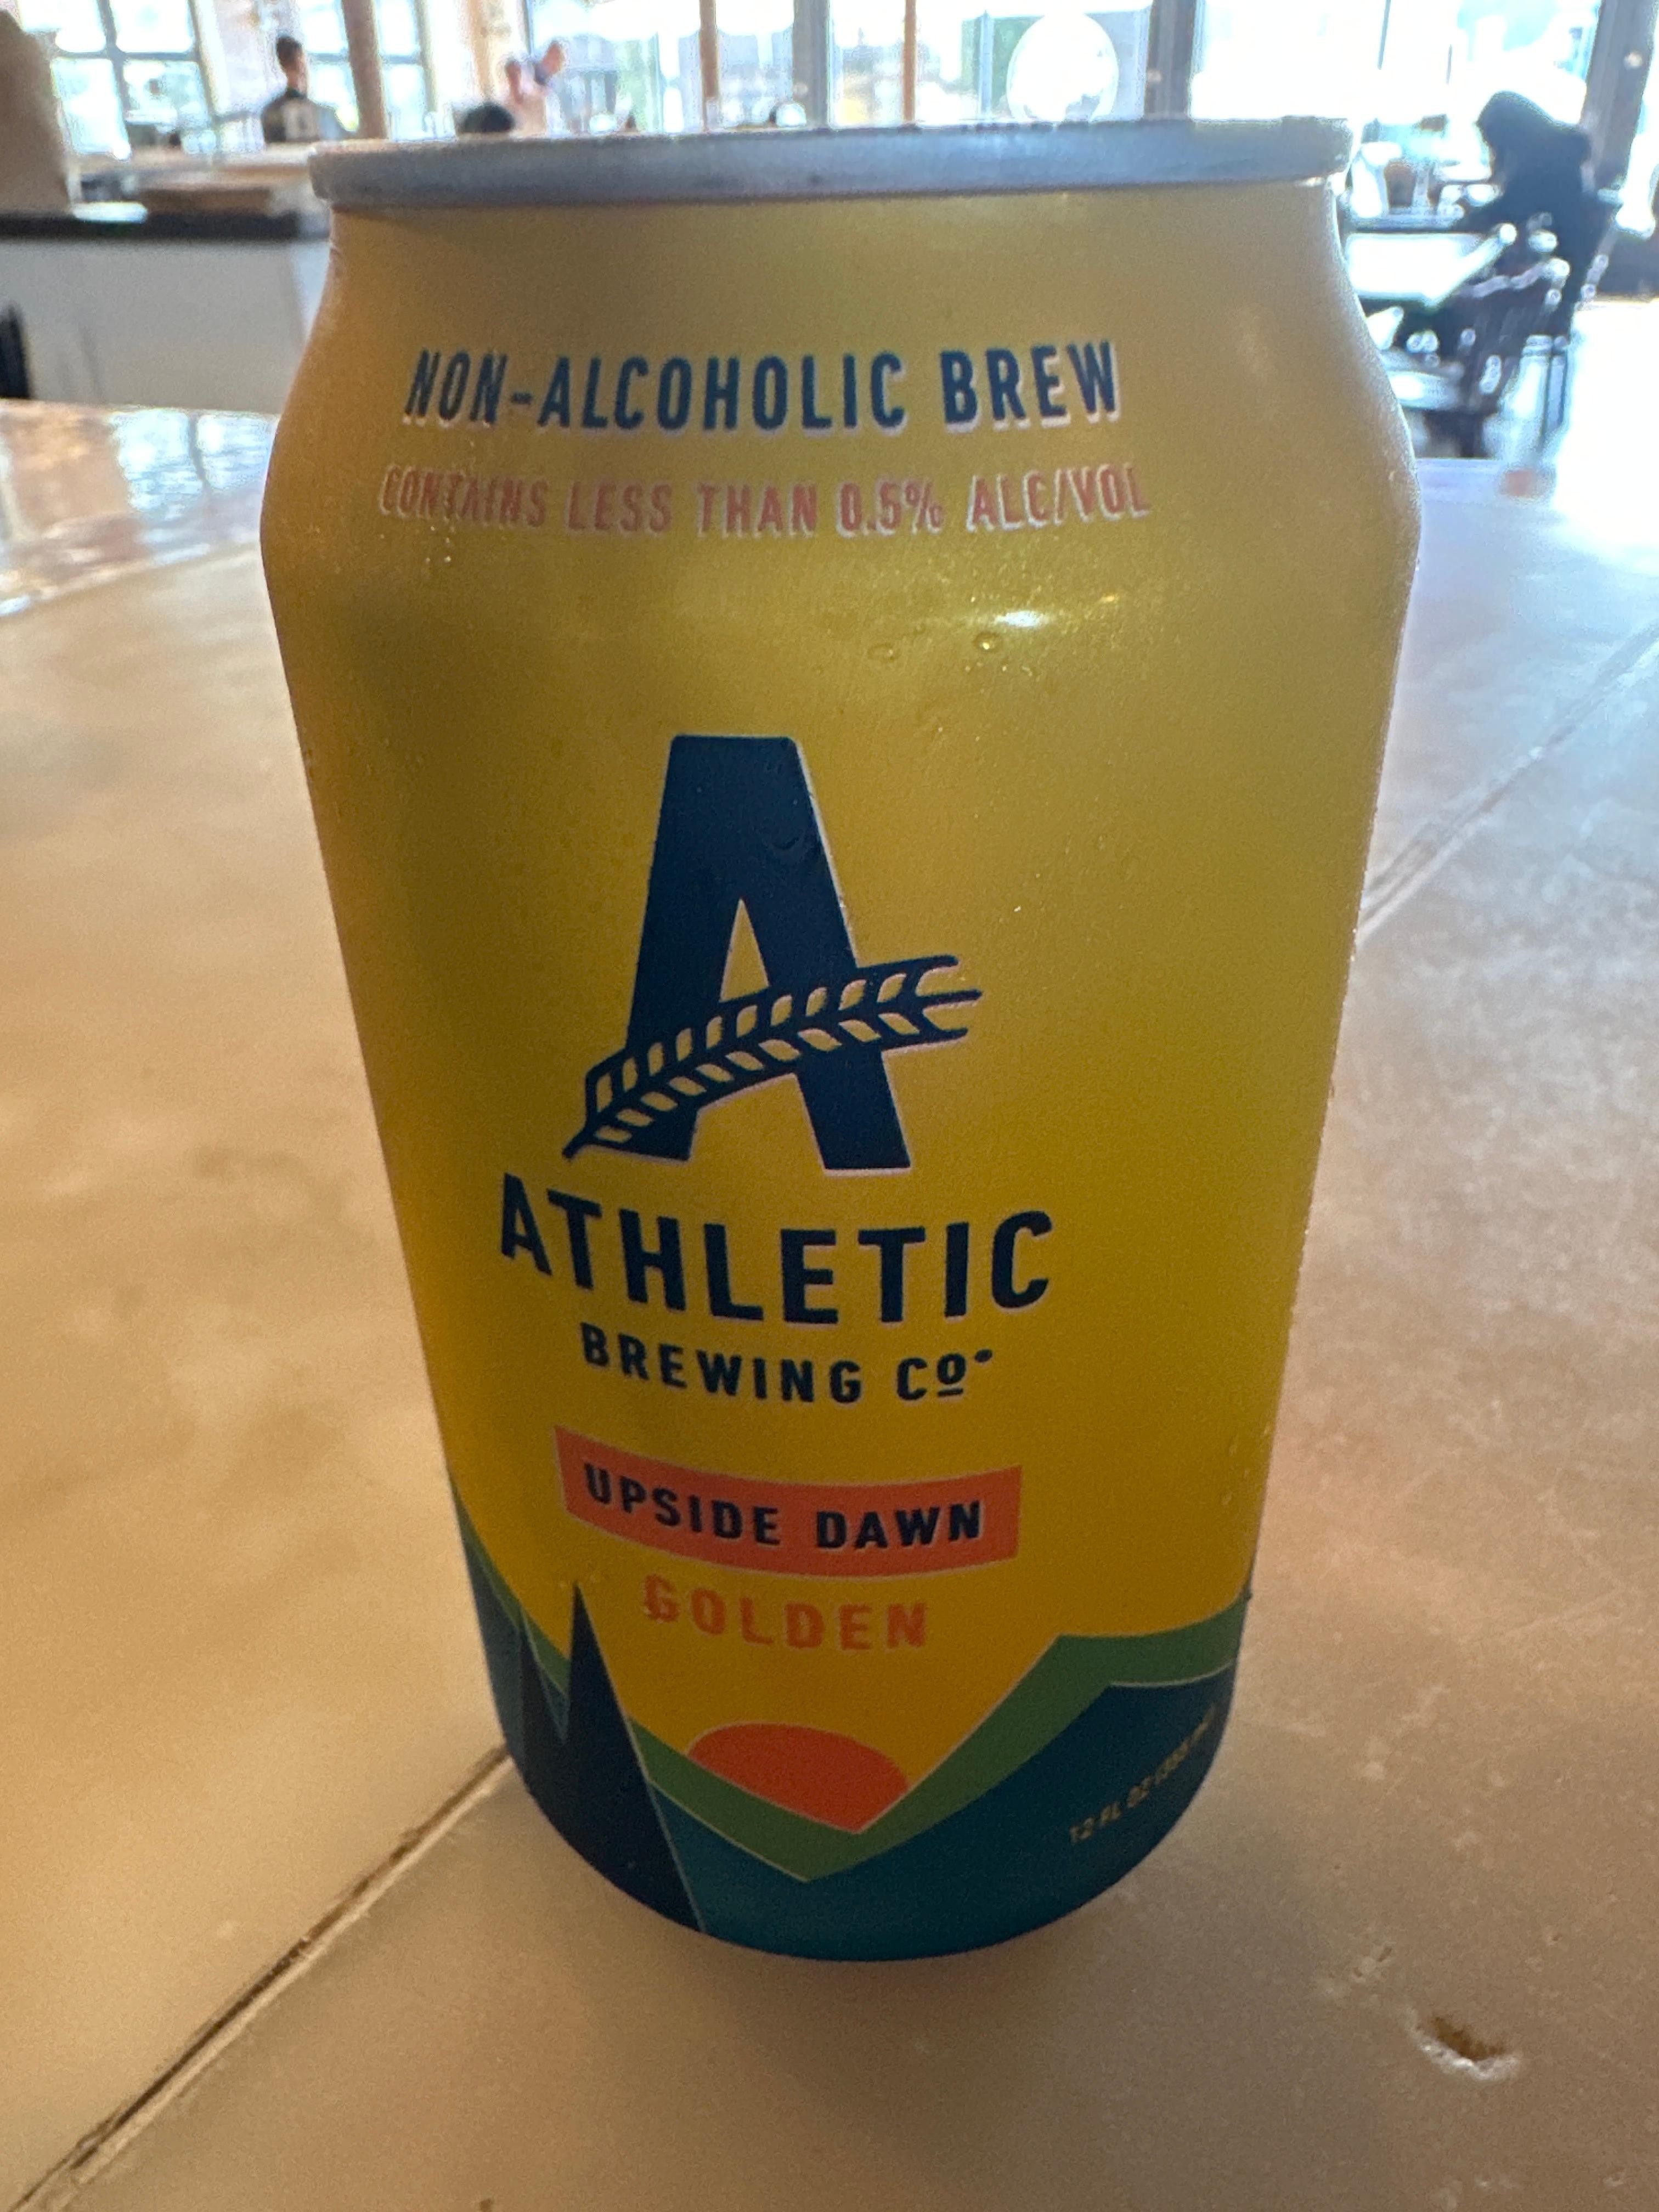 Upside Dawn Golden (NA) -  Athletic Brewing Co (non-alcoholic)